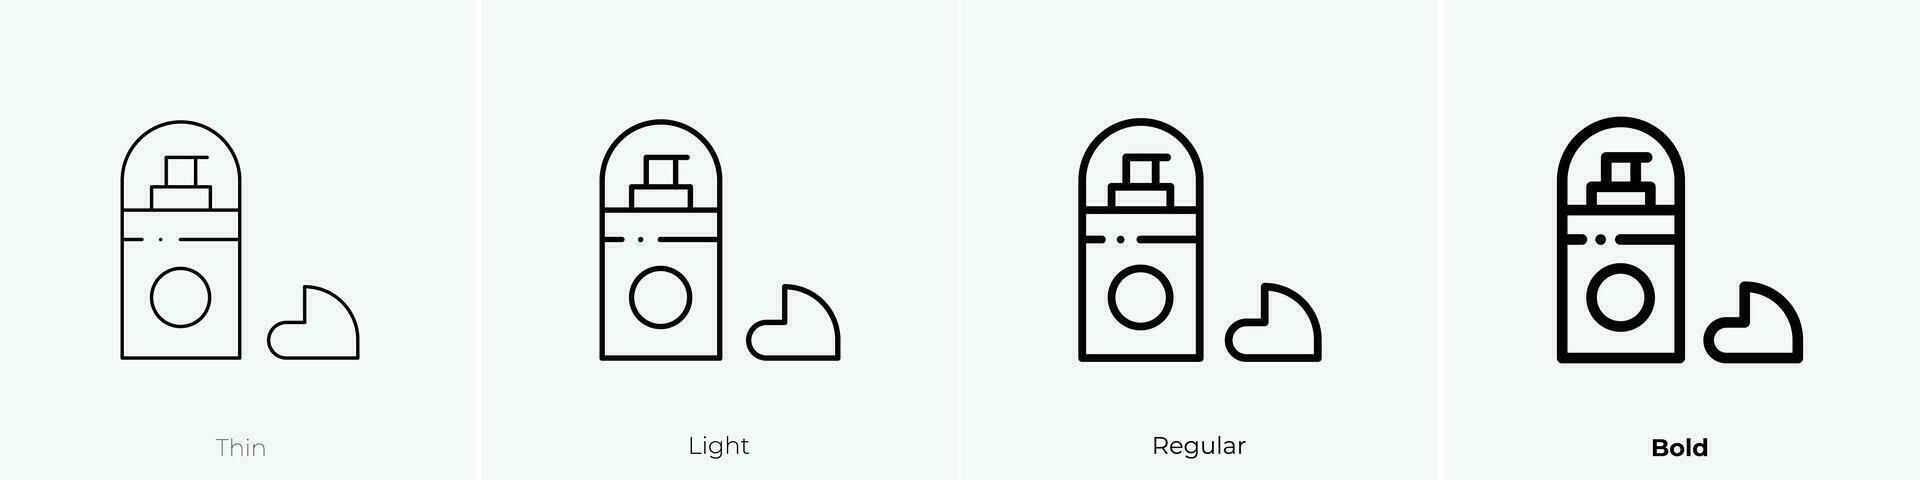 shaving icon. Thin, Light, Regular And Bold style design isolated on white background vector